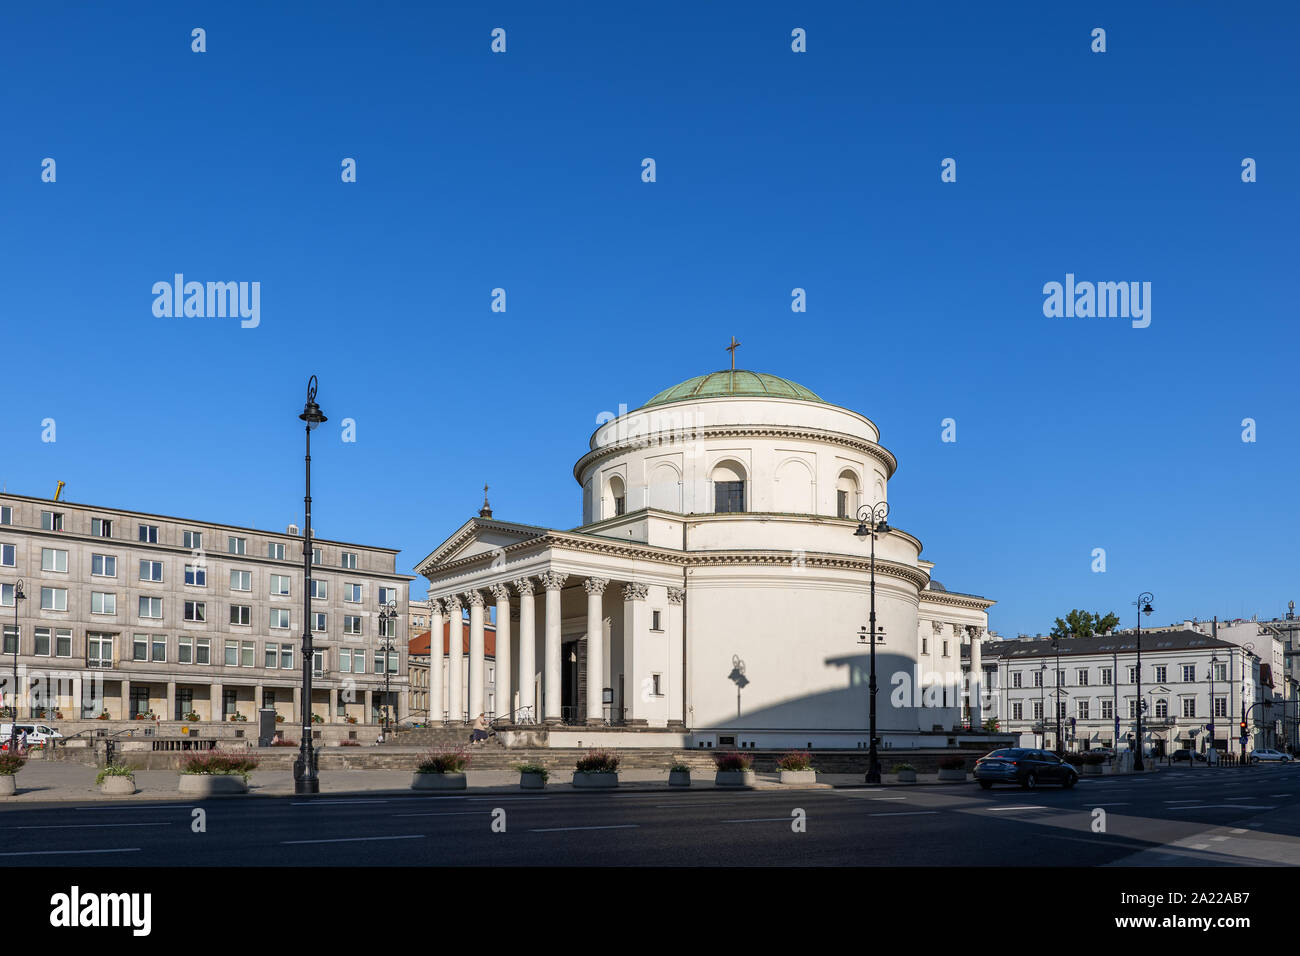 Poland, Warsaw, St. Alexander Church on Three Crosses Square in city center Stock Photo